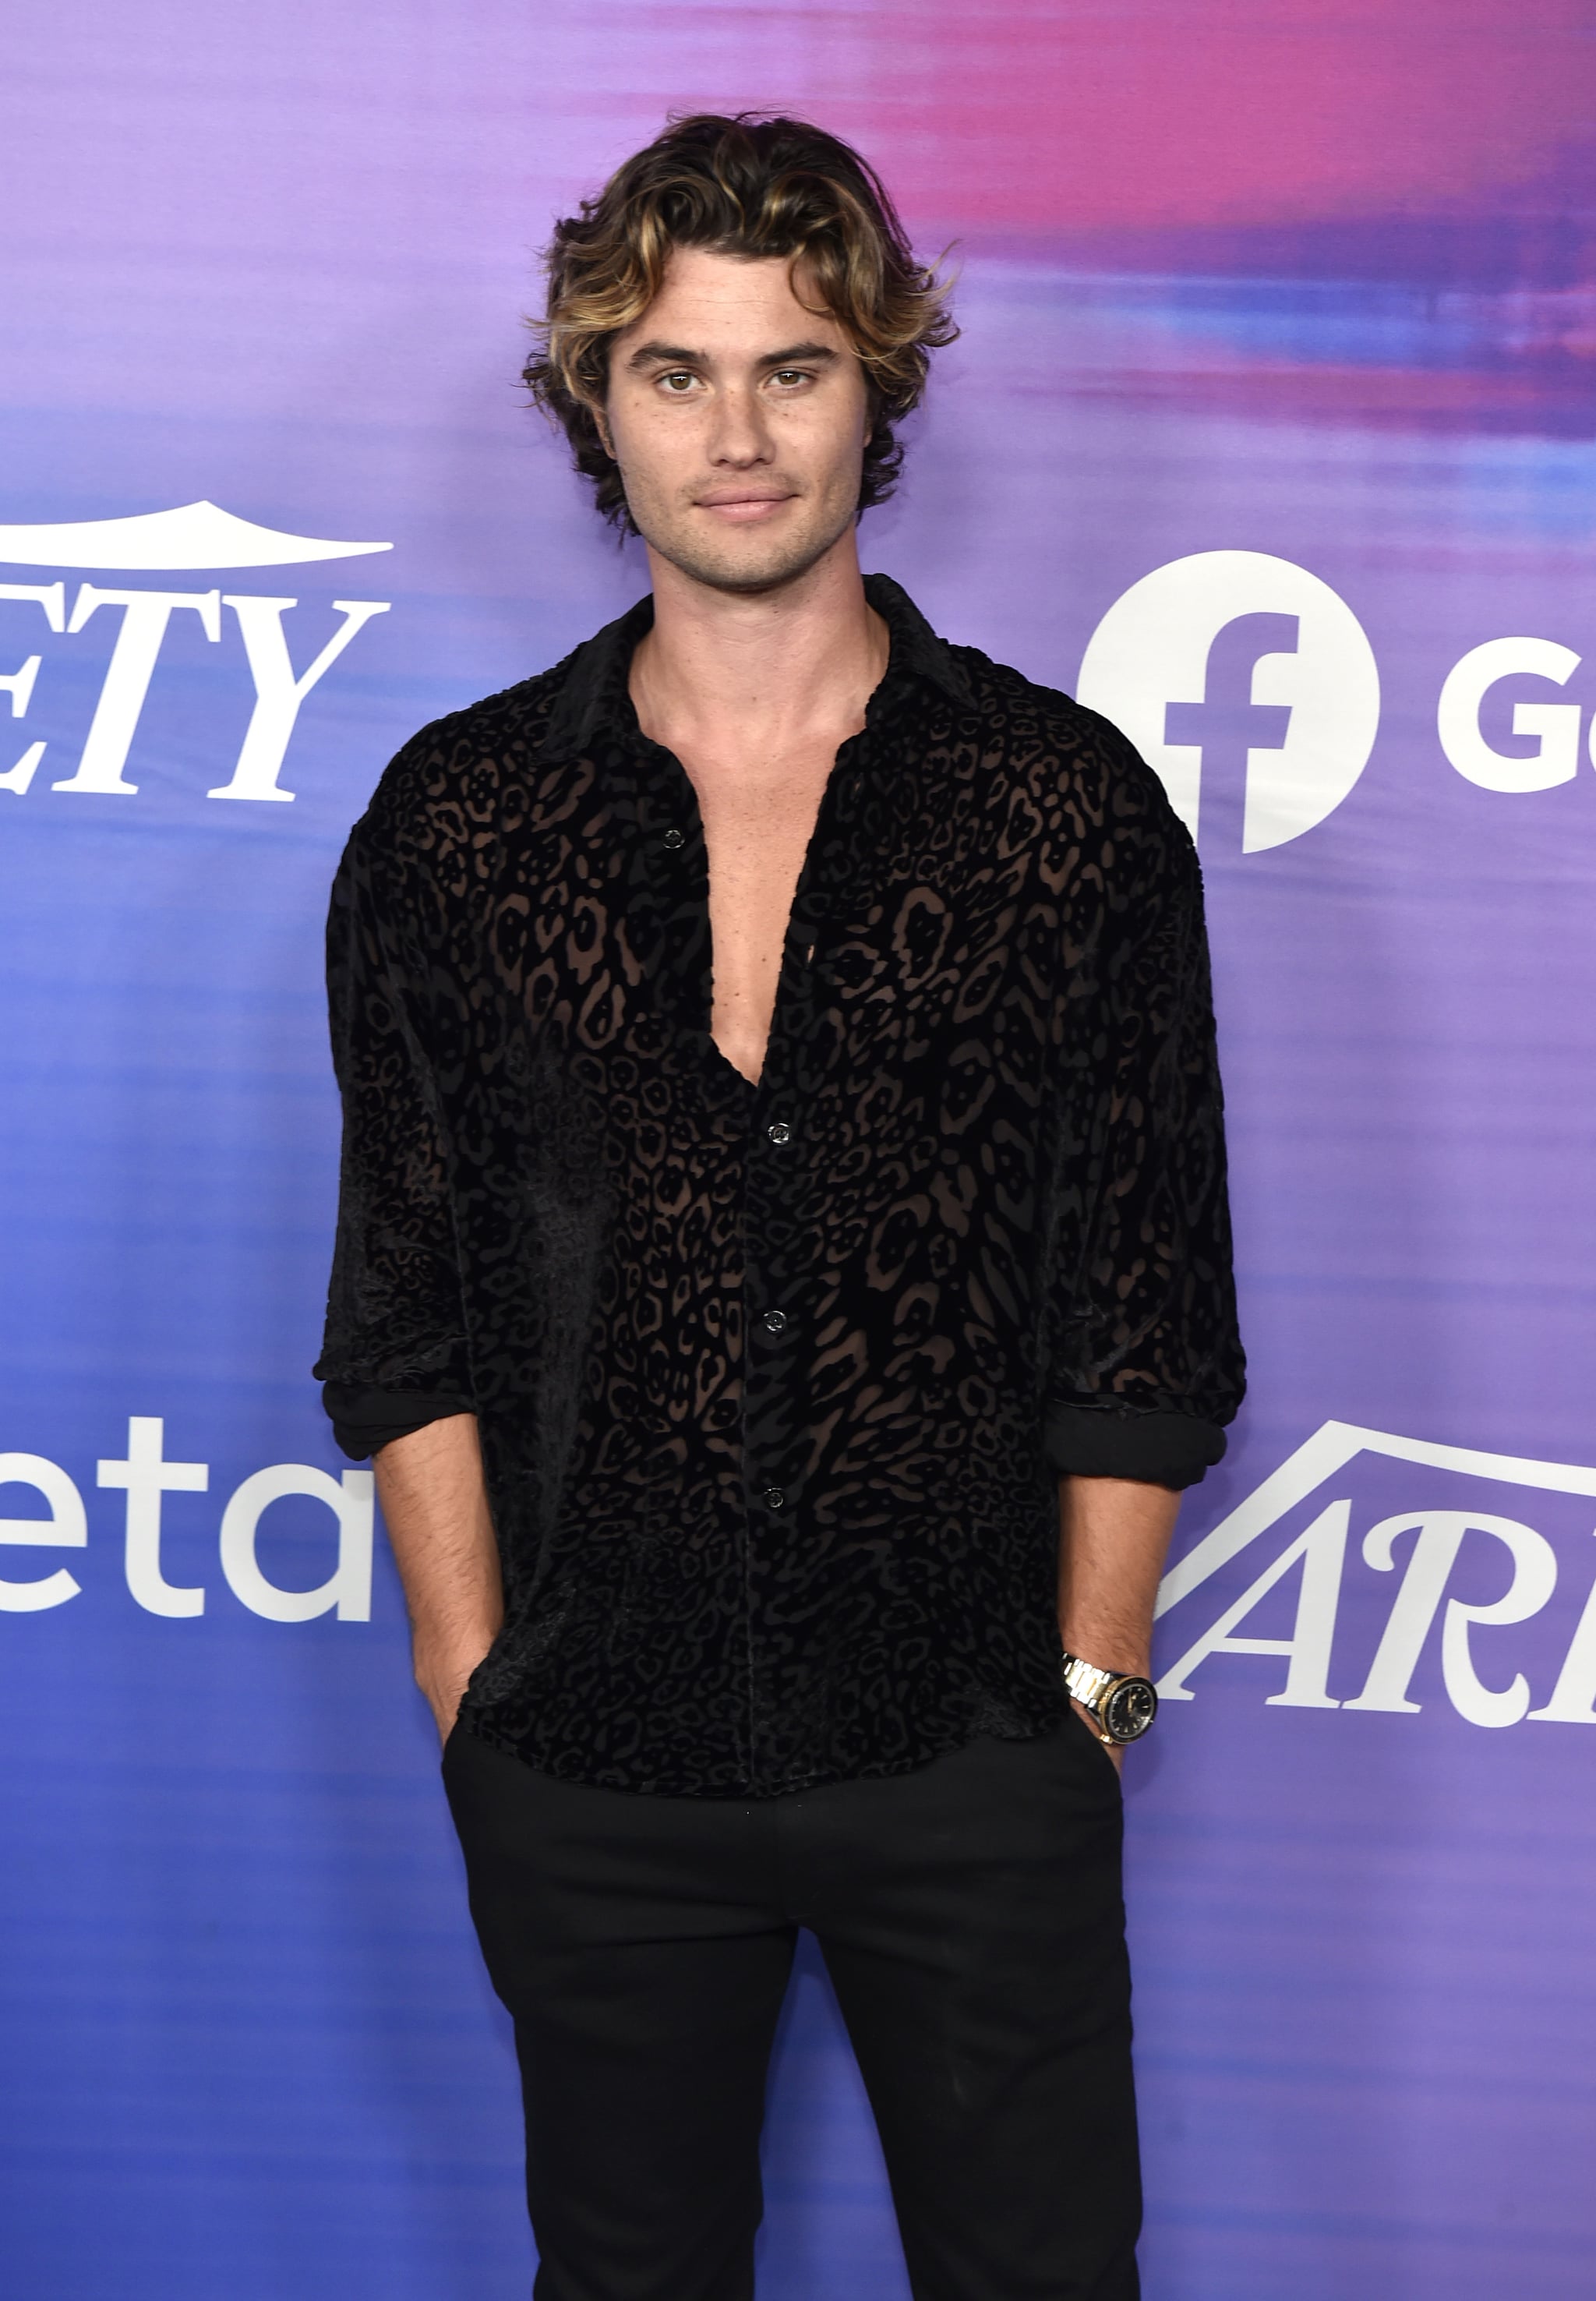 HOLLYWOOD, CALIFORNIA - AUGUST 11: Chase Stokes attends Variety's 2022 Power of Young Hollywood Celebration presented by Facebook Gaming on August 11, 2022 in Hollywood, California. (Photo by Rodin Eckenroth/Getty Images)